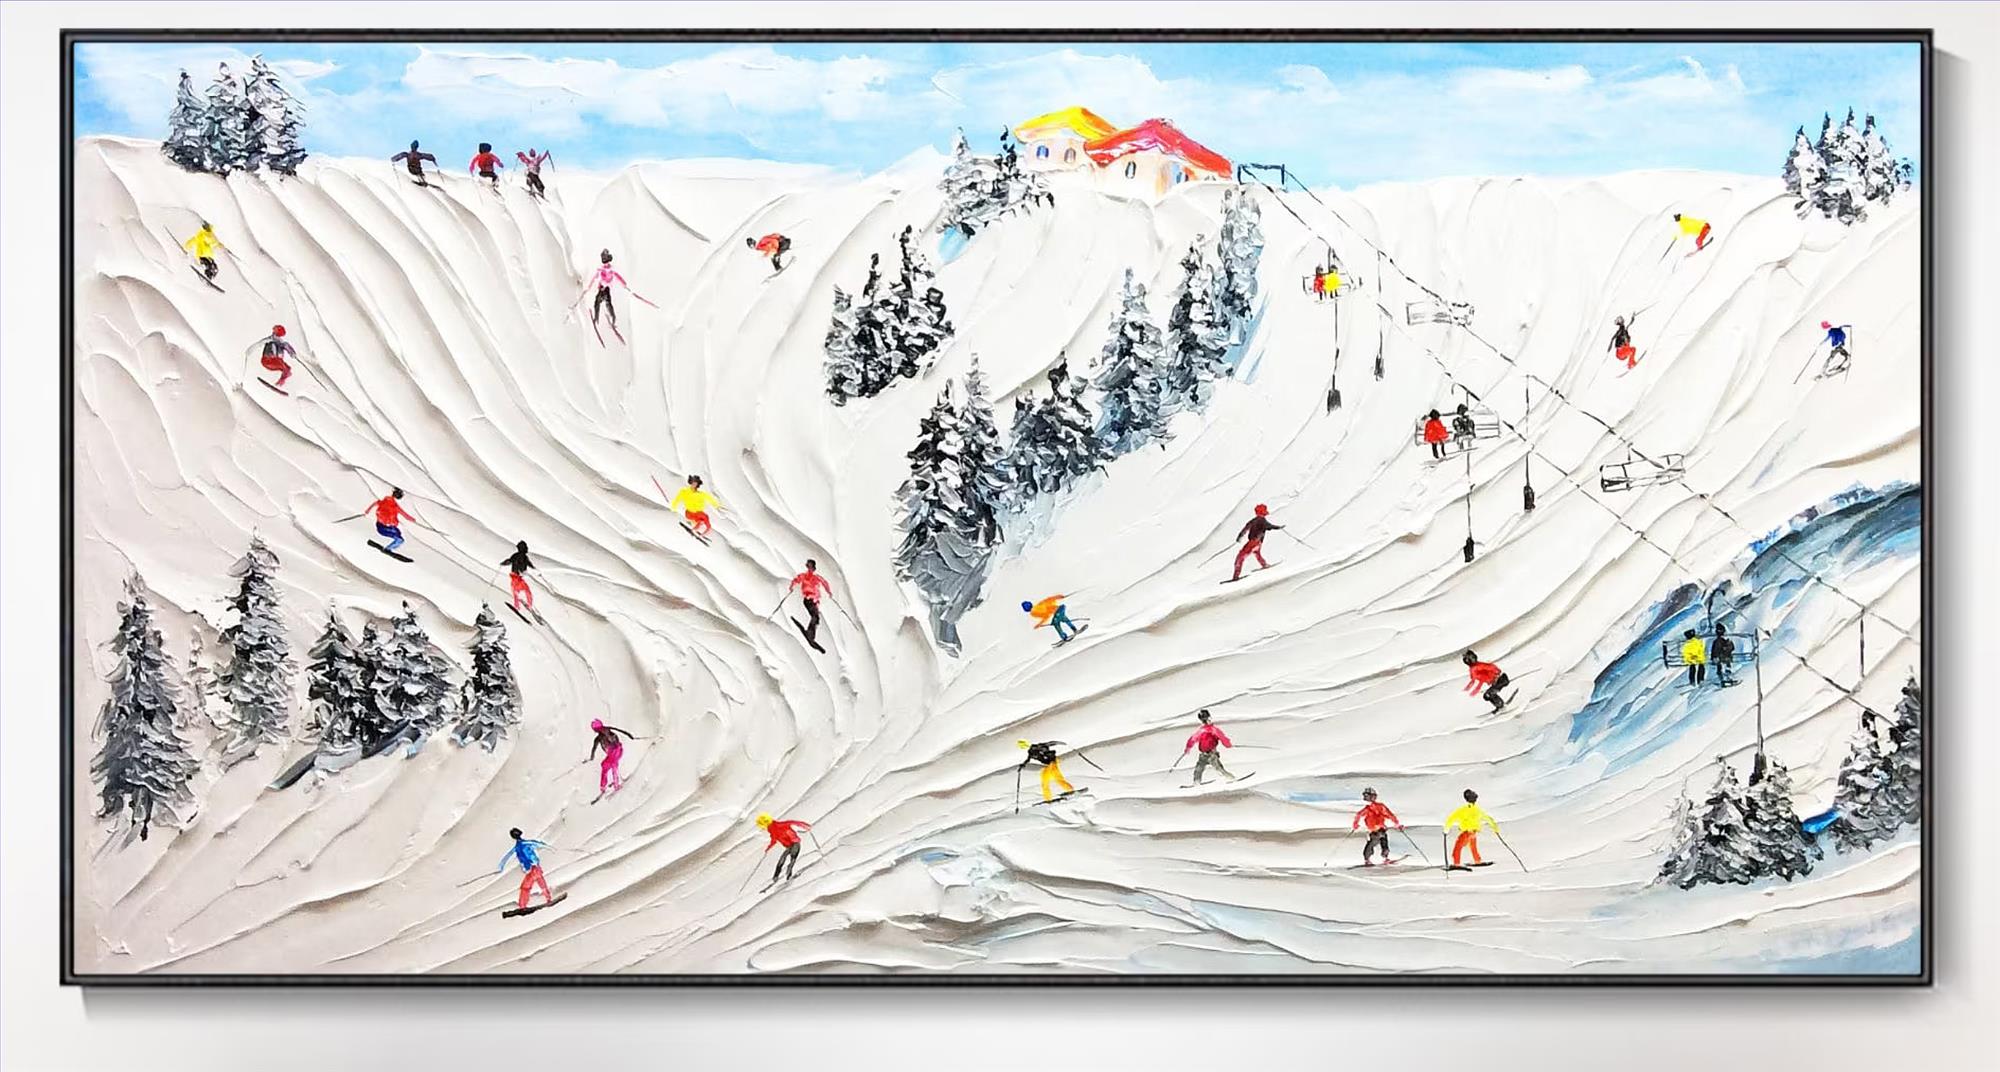 Skier on Snowy Mountain Wall Art Sport White Snow Skiing Room Decor by Knife 15 Oil Paintings